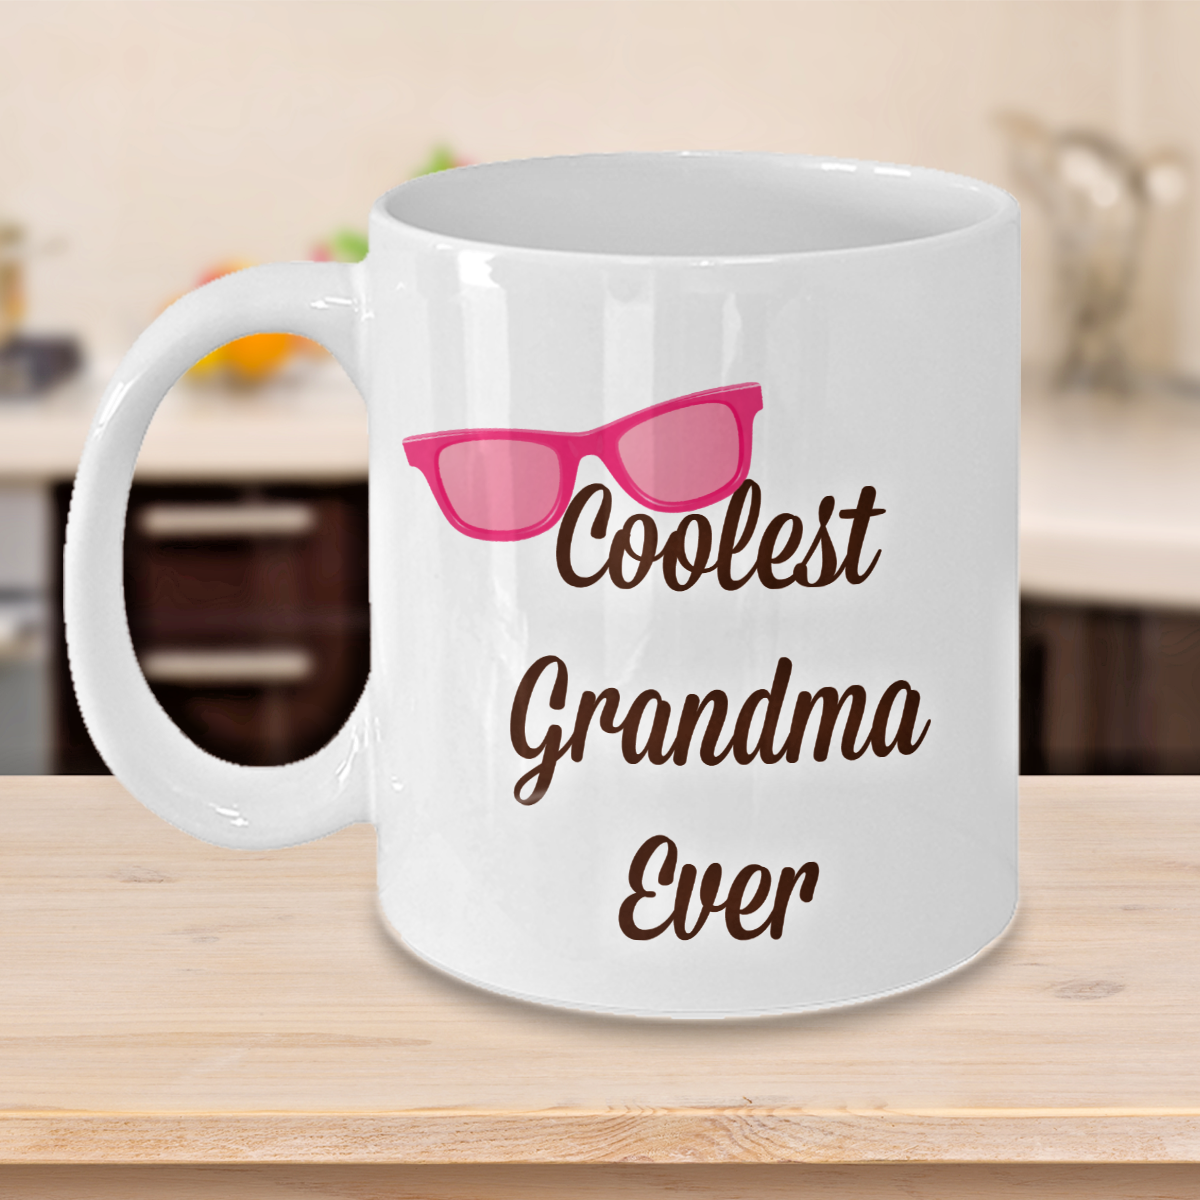 Coolest Grandma Ever- Novelty Coffee Mug Gift - Fun For Birthday Mother's Day White Ceramic Cup